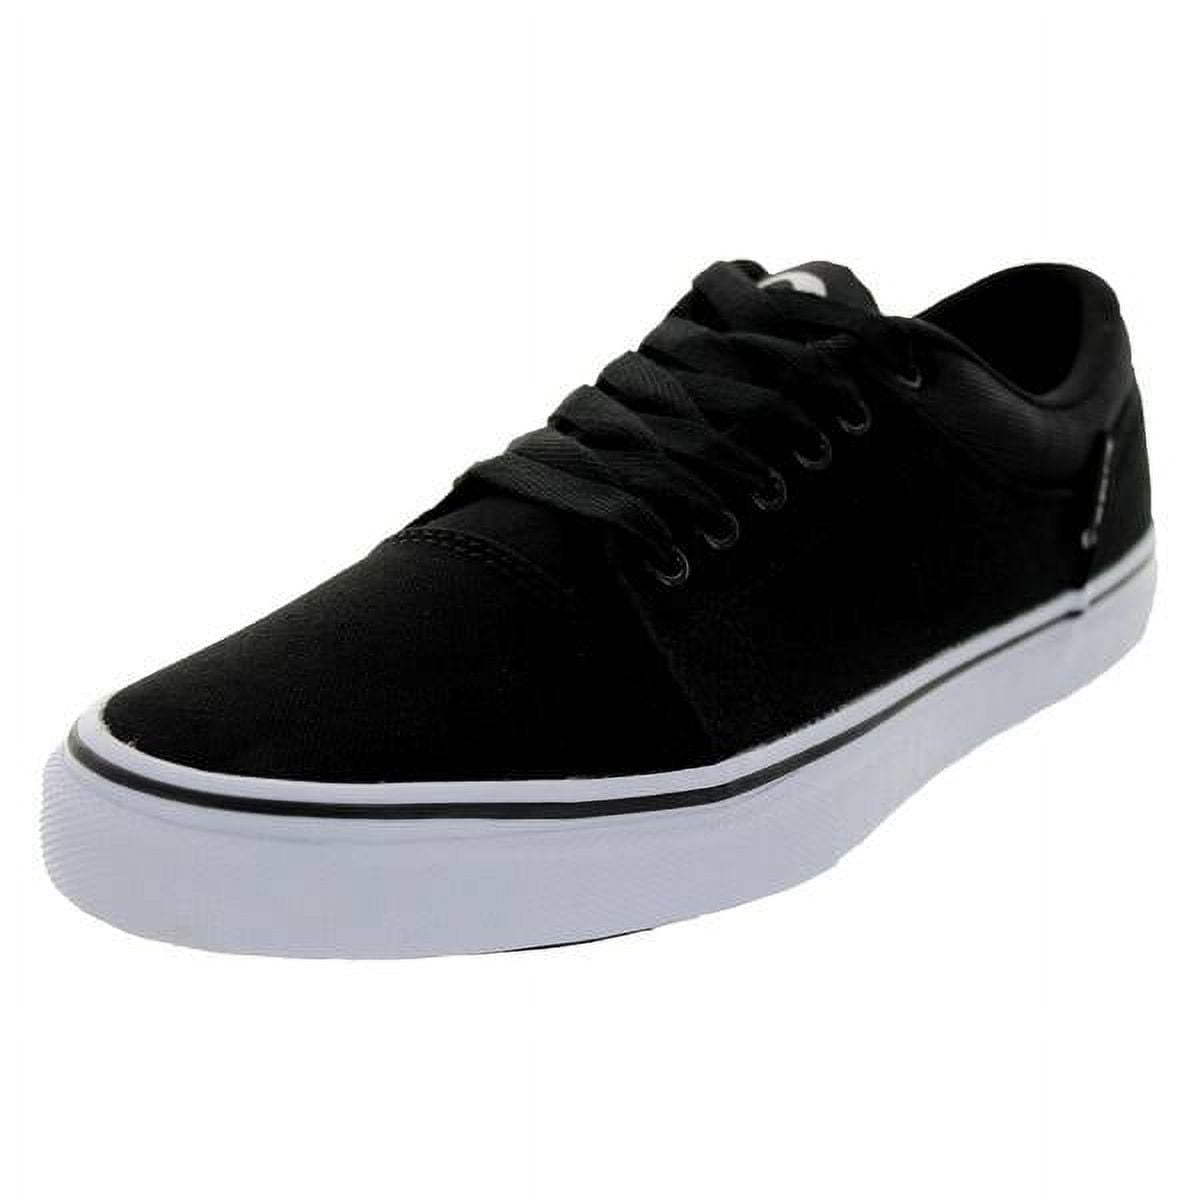 Men's Vintage Retro Style Skate Shoes With Good Grip, Breathable